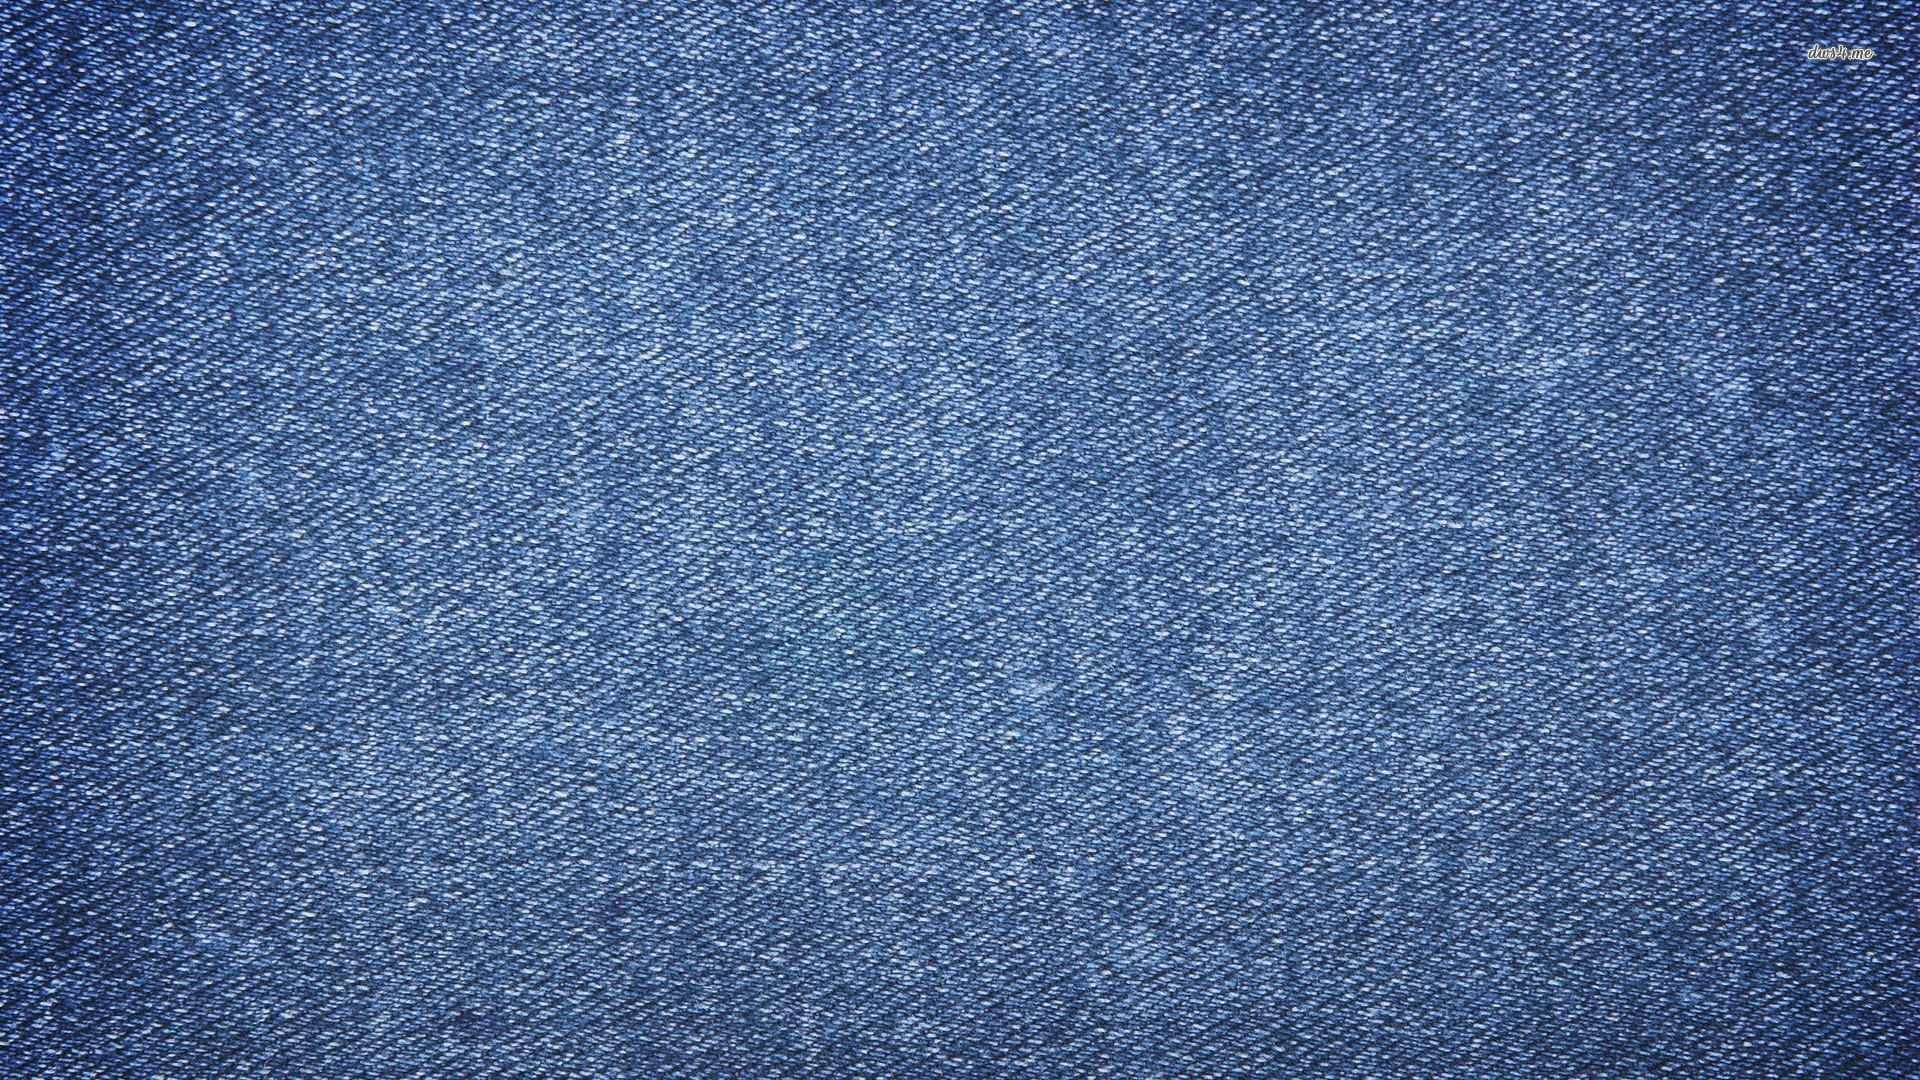 Closeup Of Obsolete Blue Jeans Pocket Denim Texture Macro Background For  Web Site Or Mobile Devices Stock Photo - Download Image Now - iStock